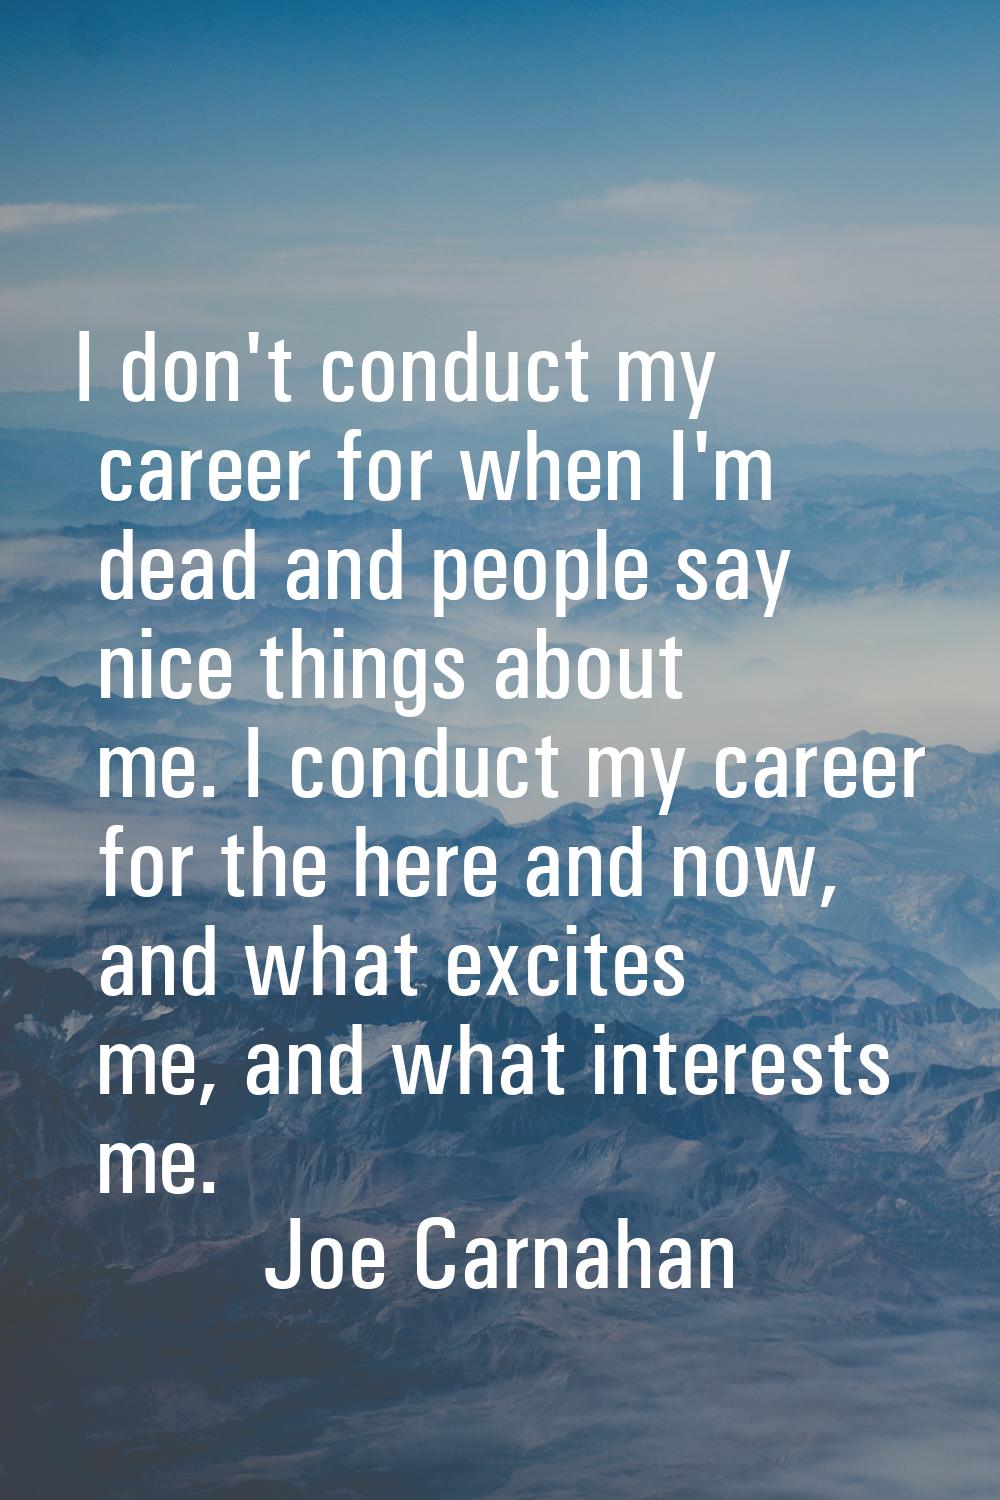 I don't conduct my career for when I'm dead and people say nice things about me. I conduct my caree